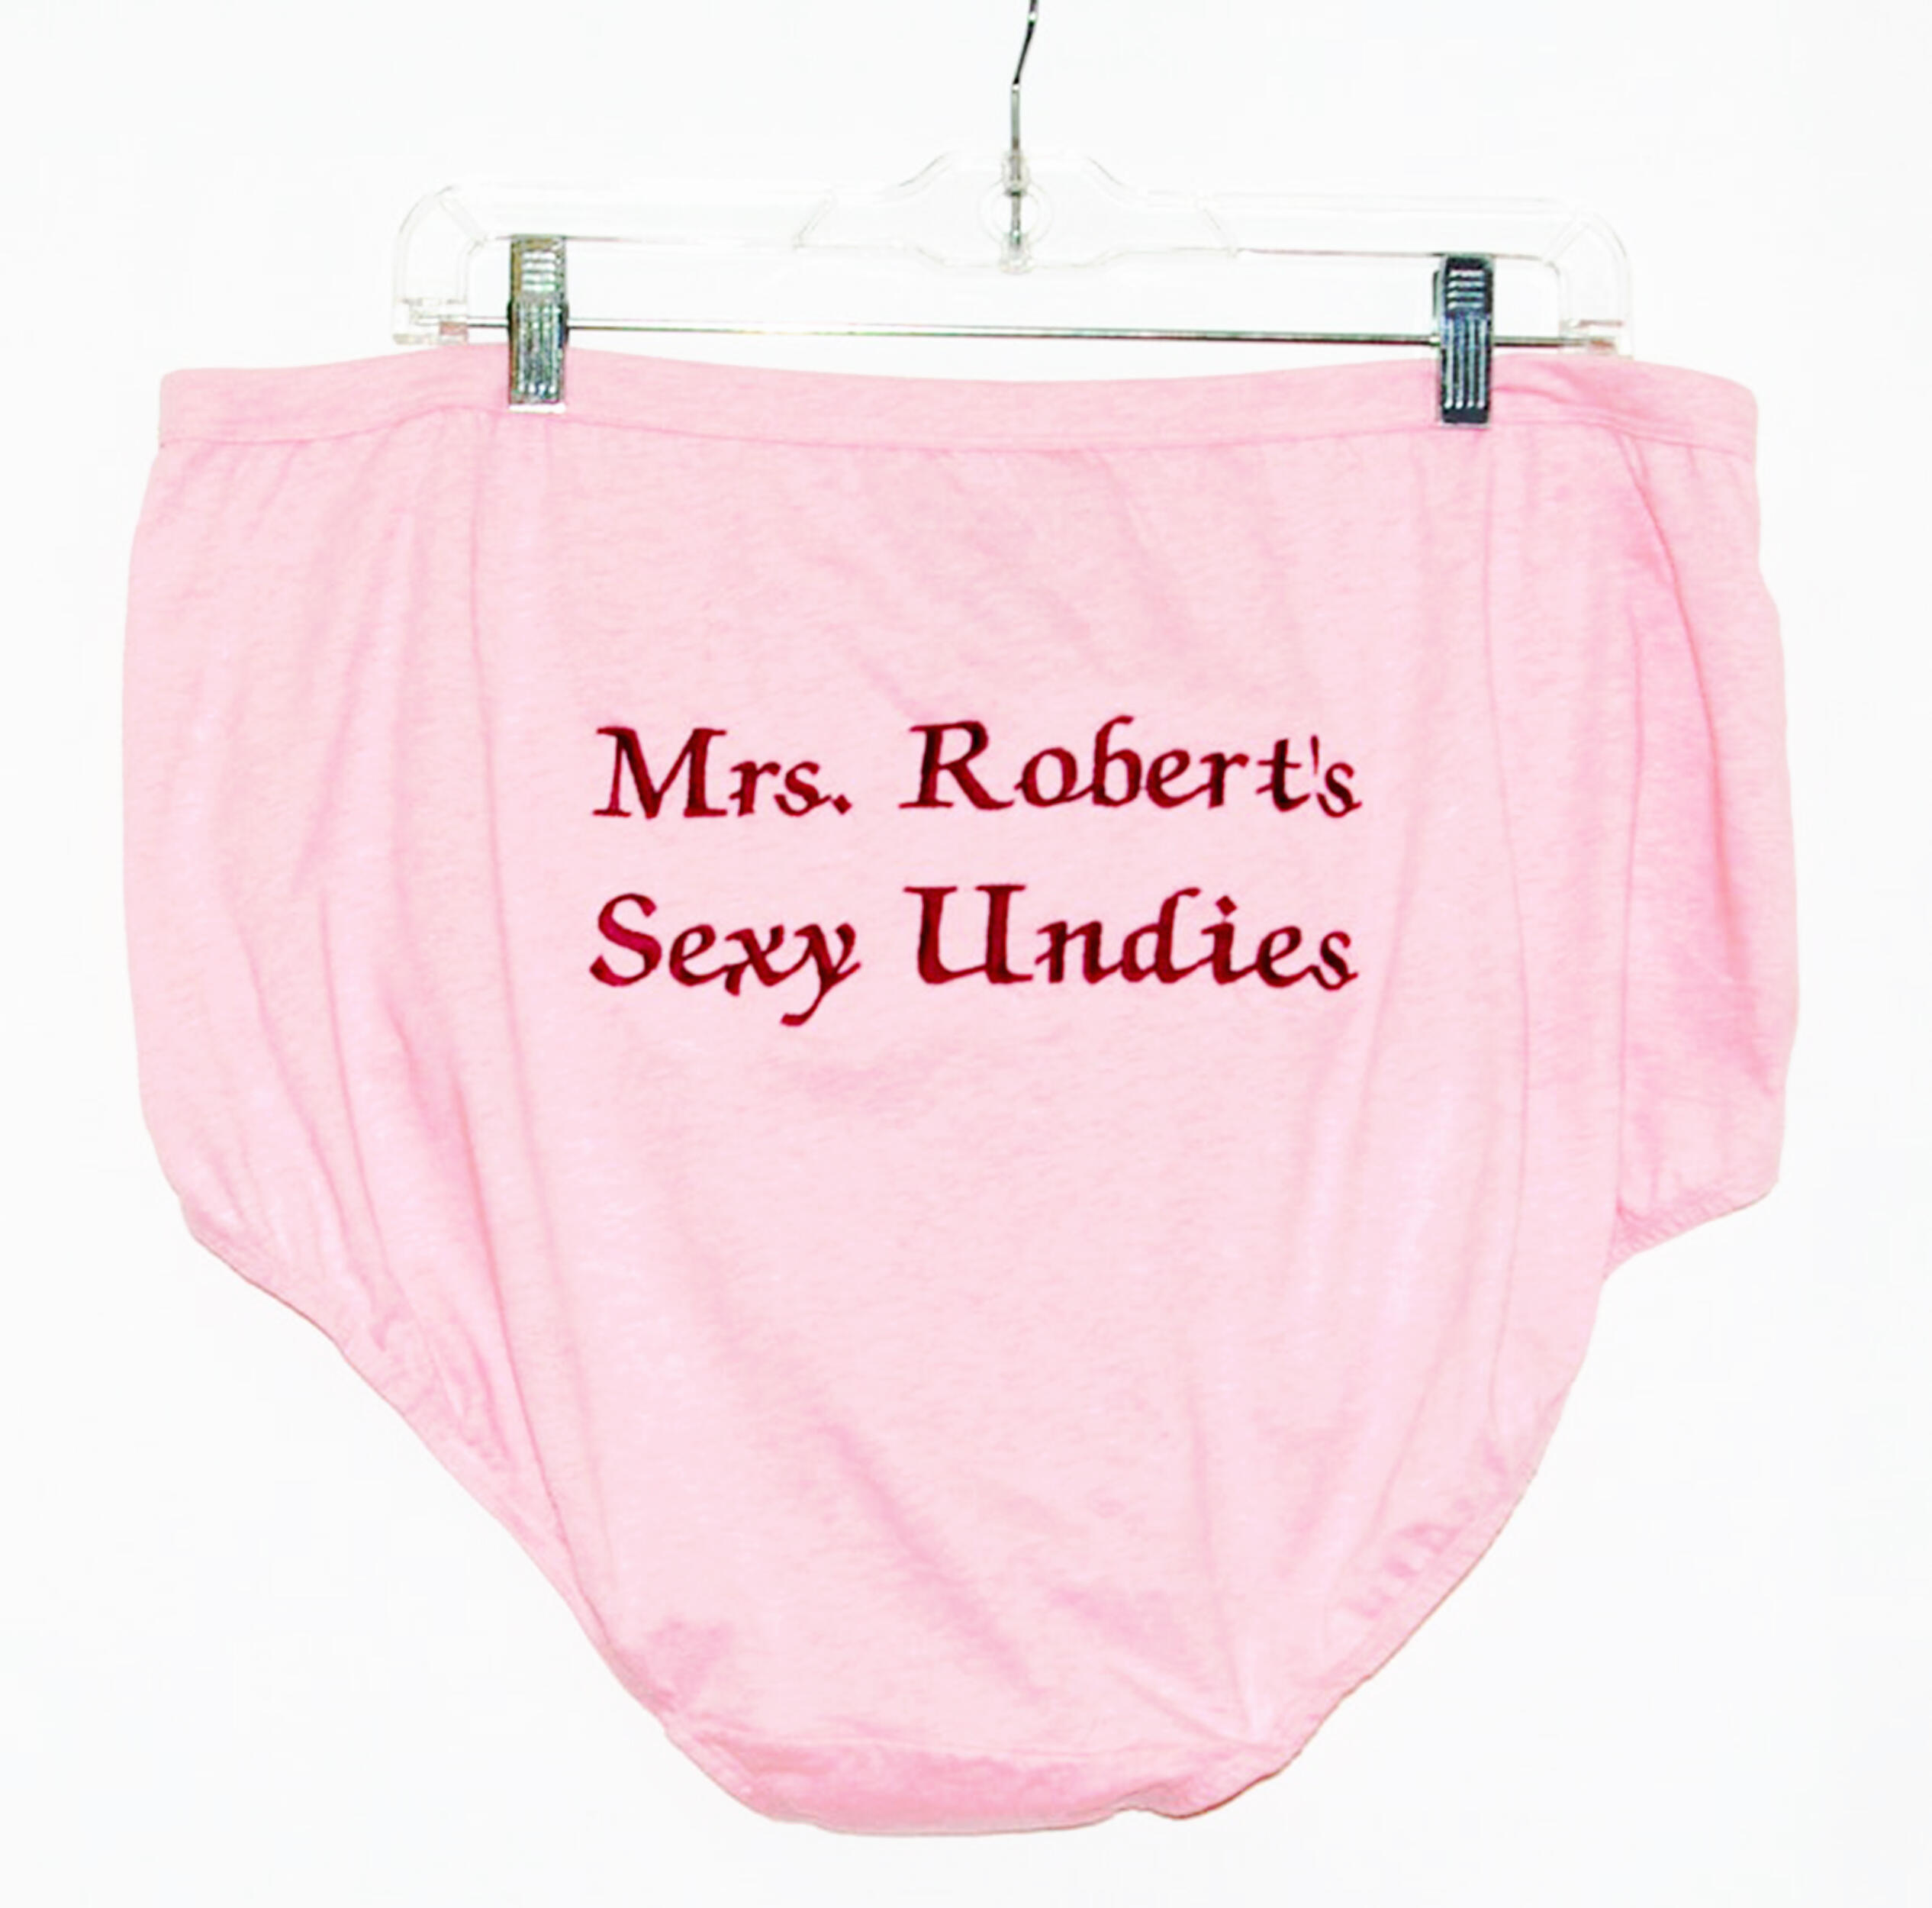 Bloomers Intimates Makes Sexy Granny Panty Underwear